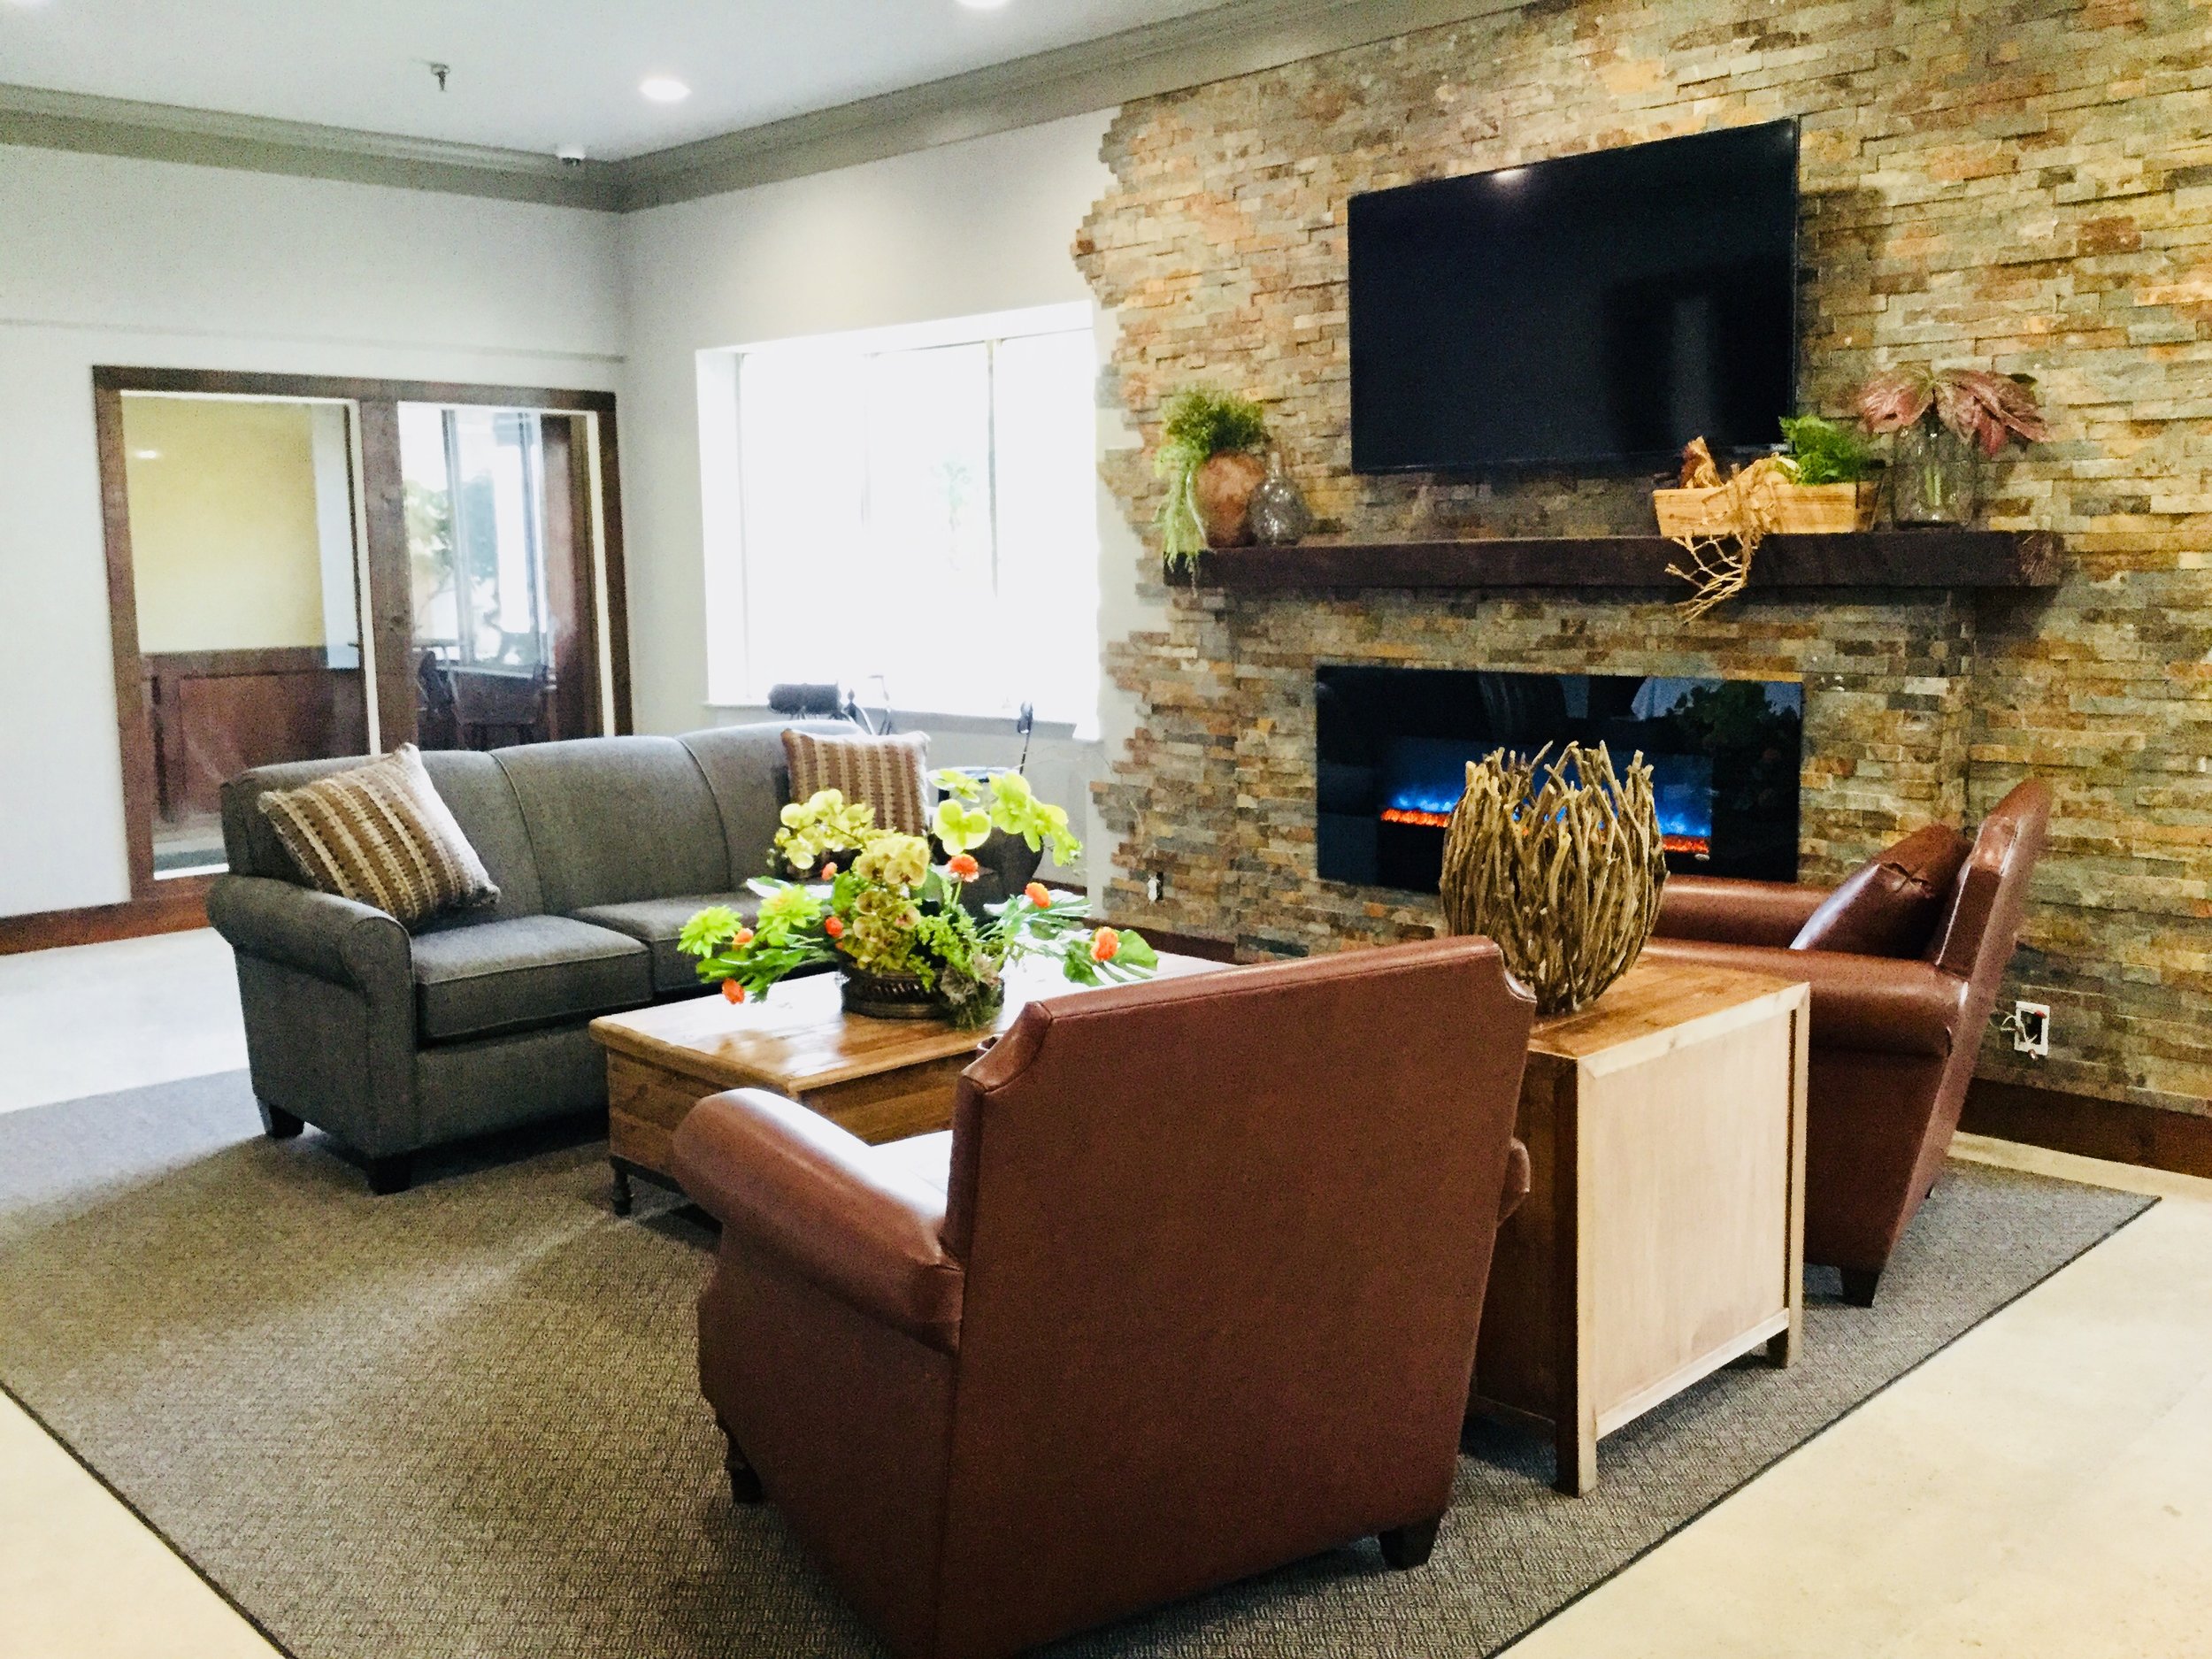 New lobby furniture with fireplace and tv 2018.jpg